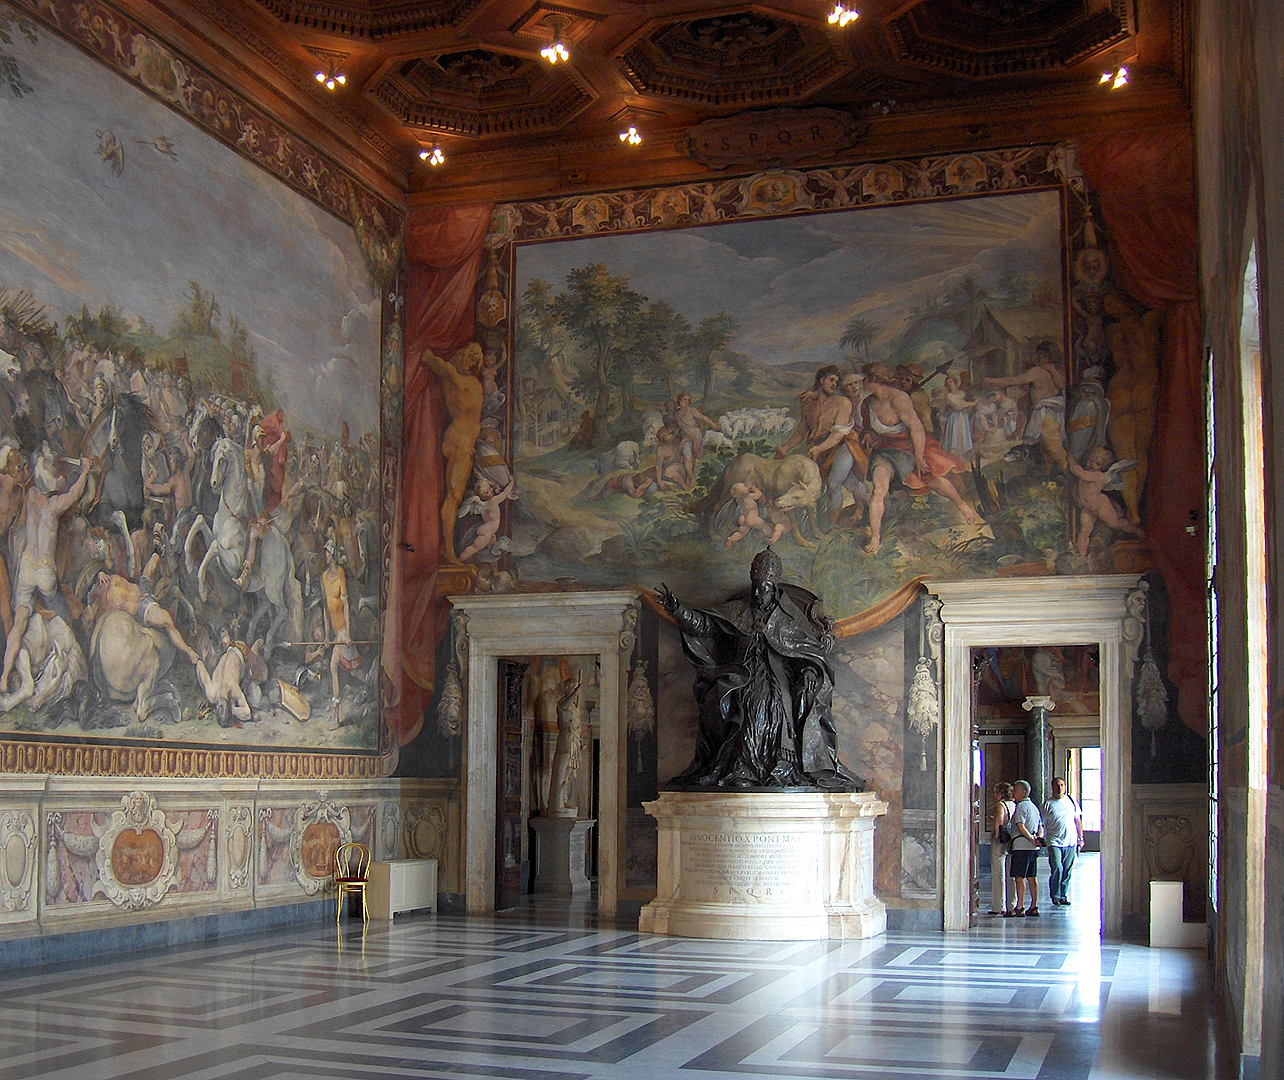 Hal van de Horatii and Curiatii (Rome), Hall of the Horatii and Curiatii